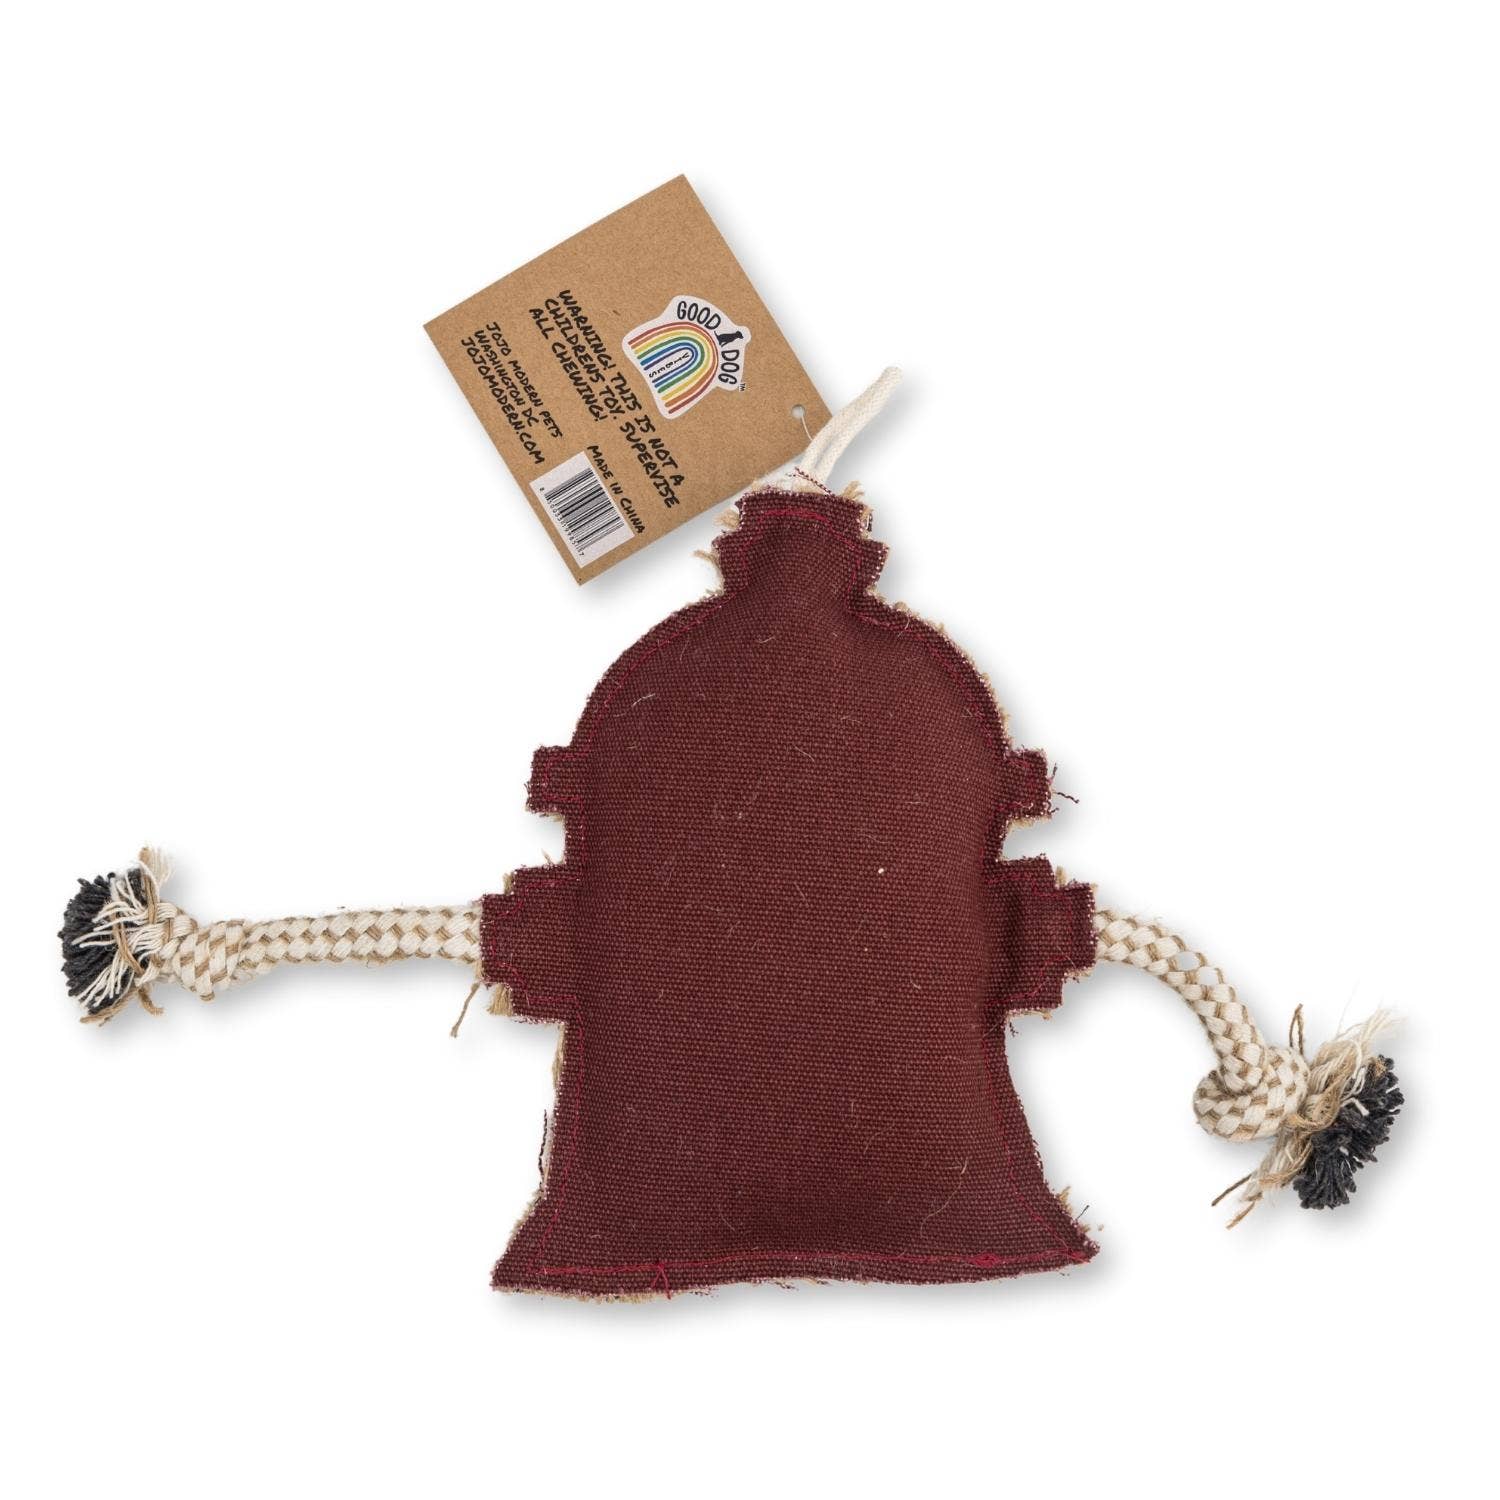 Jojo Modern Pets - Sustainable Fire Hydrant Canvas & Jute Chew Toy for Dogs - Happy Hounds Pet Supply